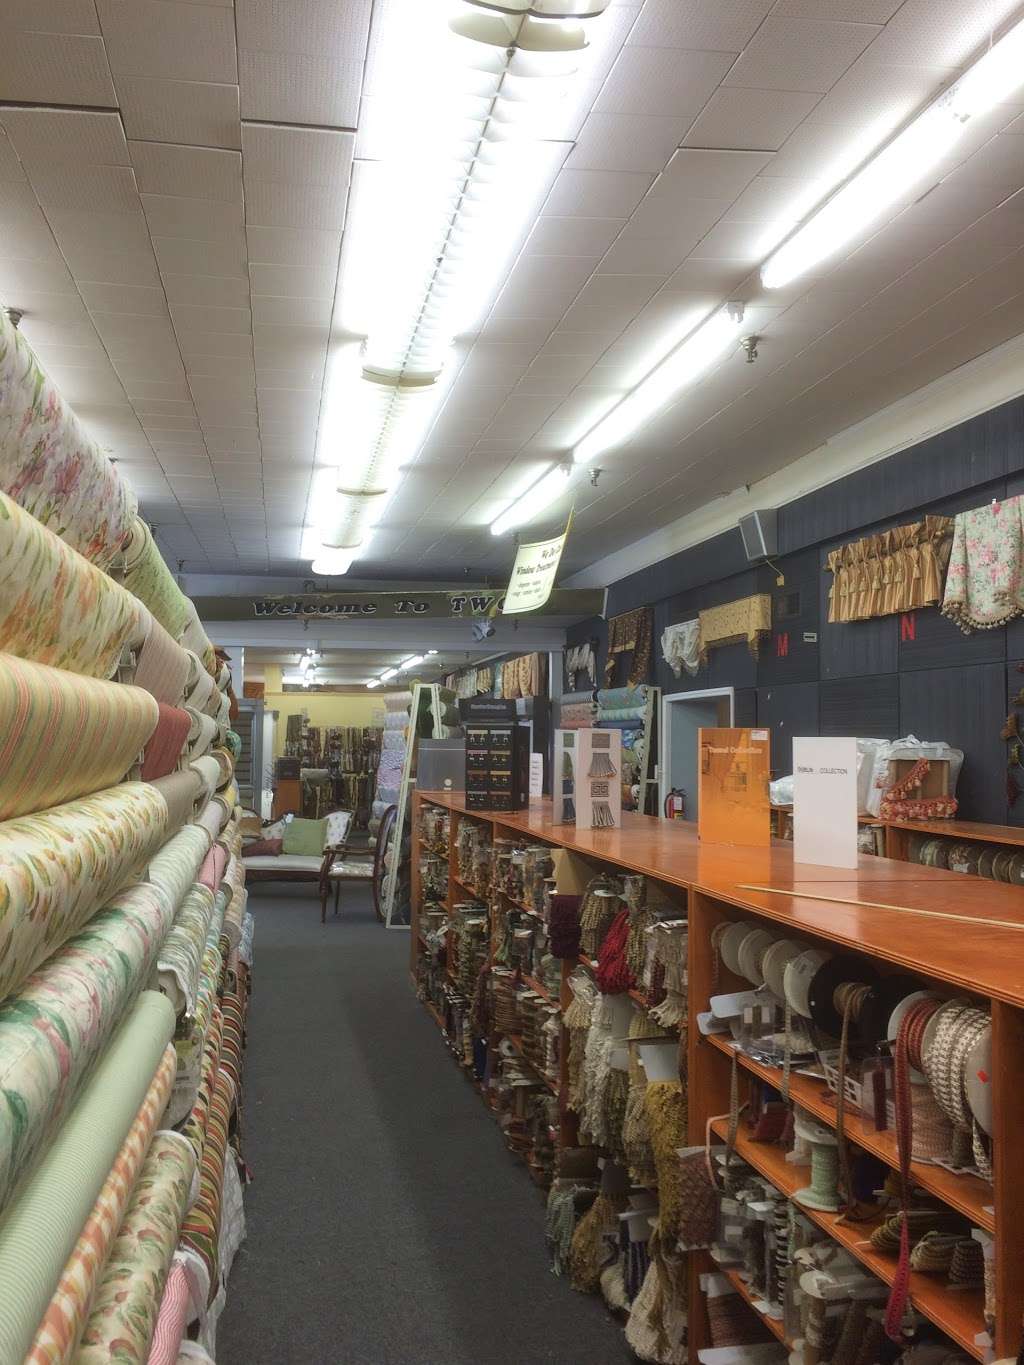 TWG Fabrics & Home Decorating Center | 115 Wisner Ave, Middletown, NY 10940 | Phone: (845) 343-3423